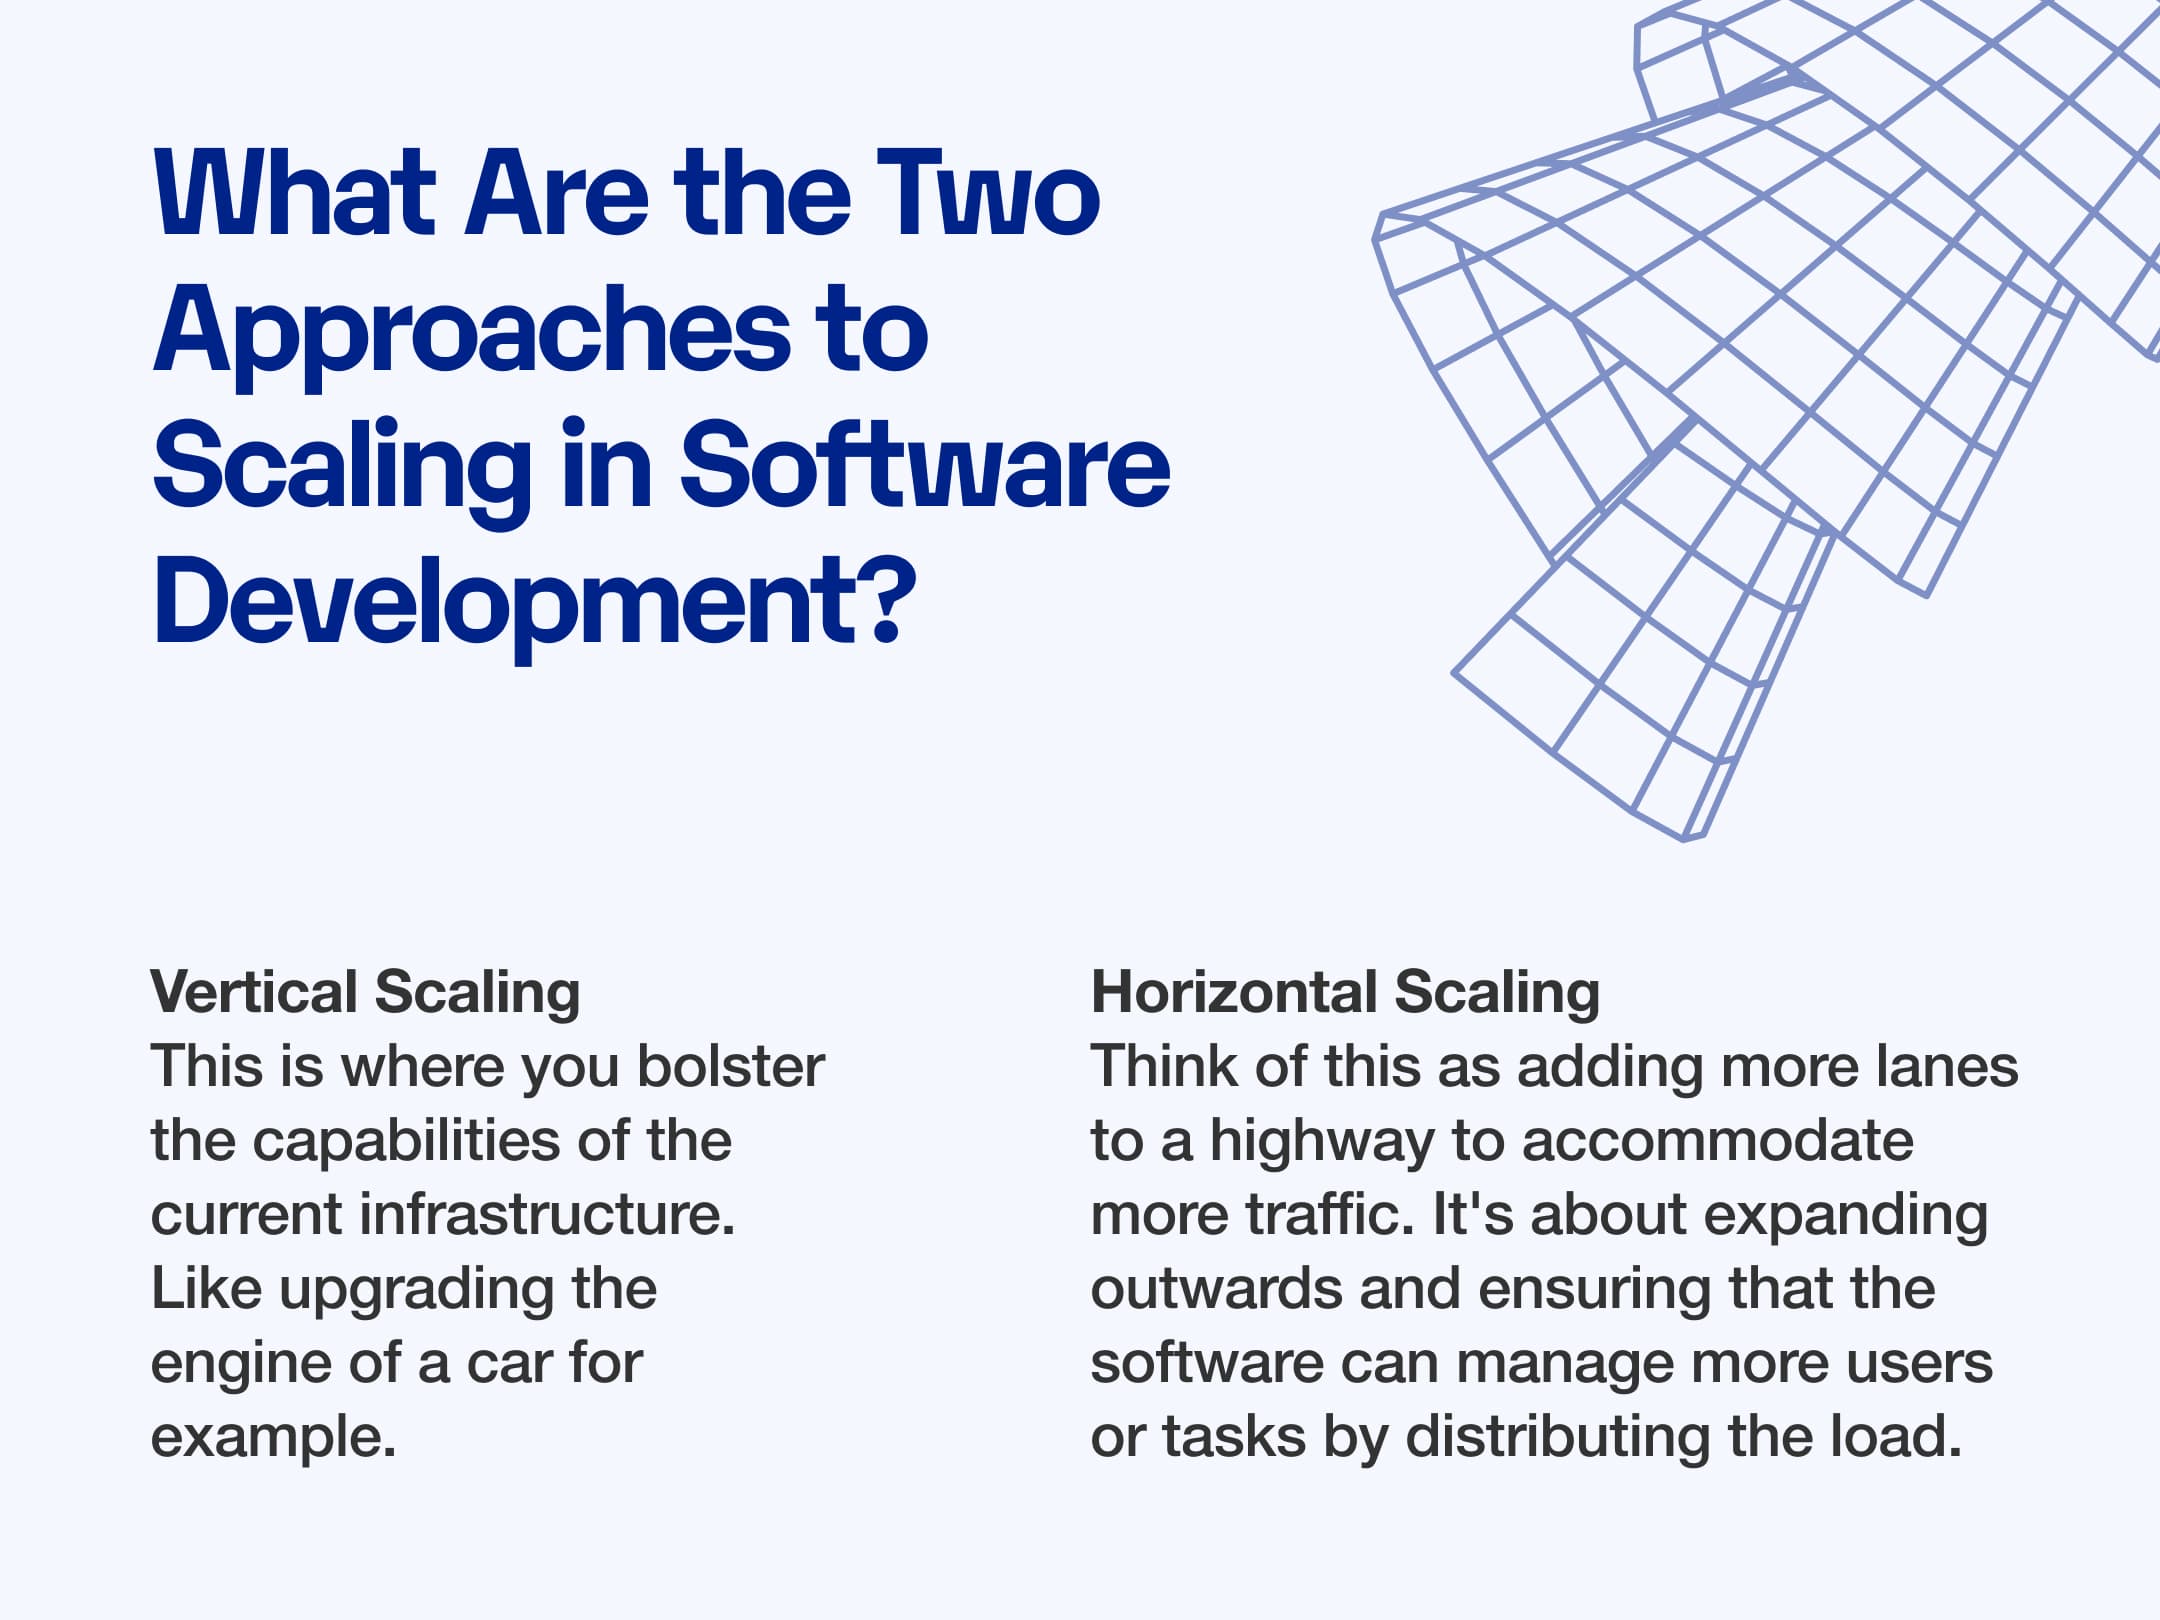 What Are the Two Approaches to Scaling in Software Development